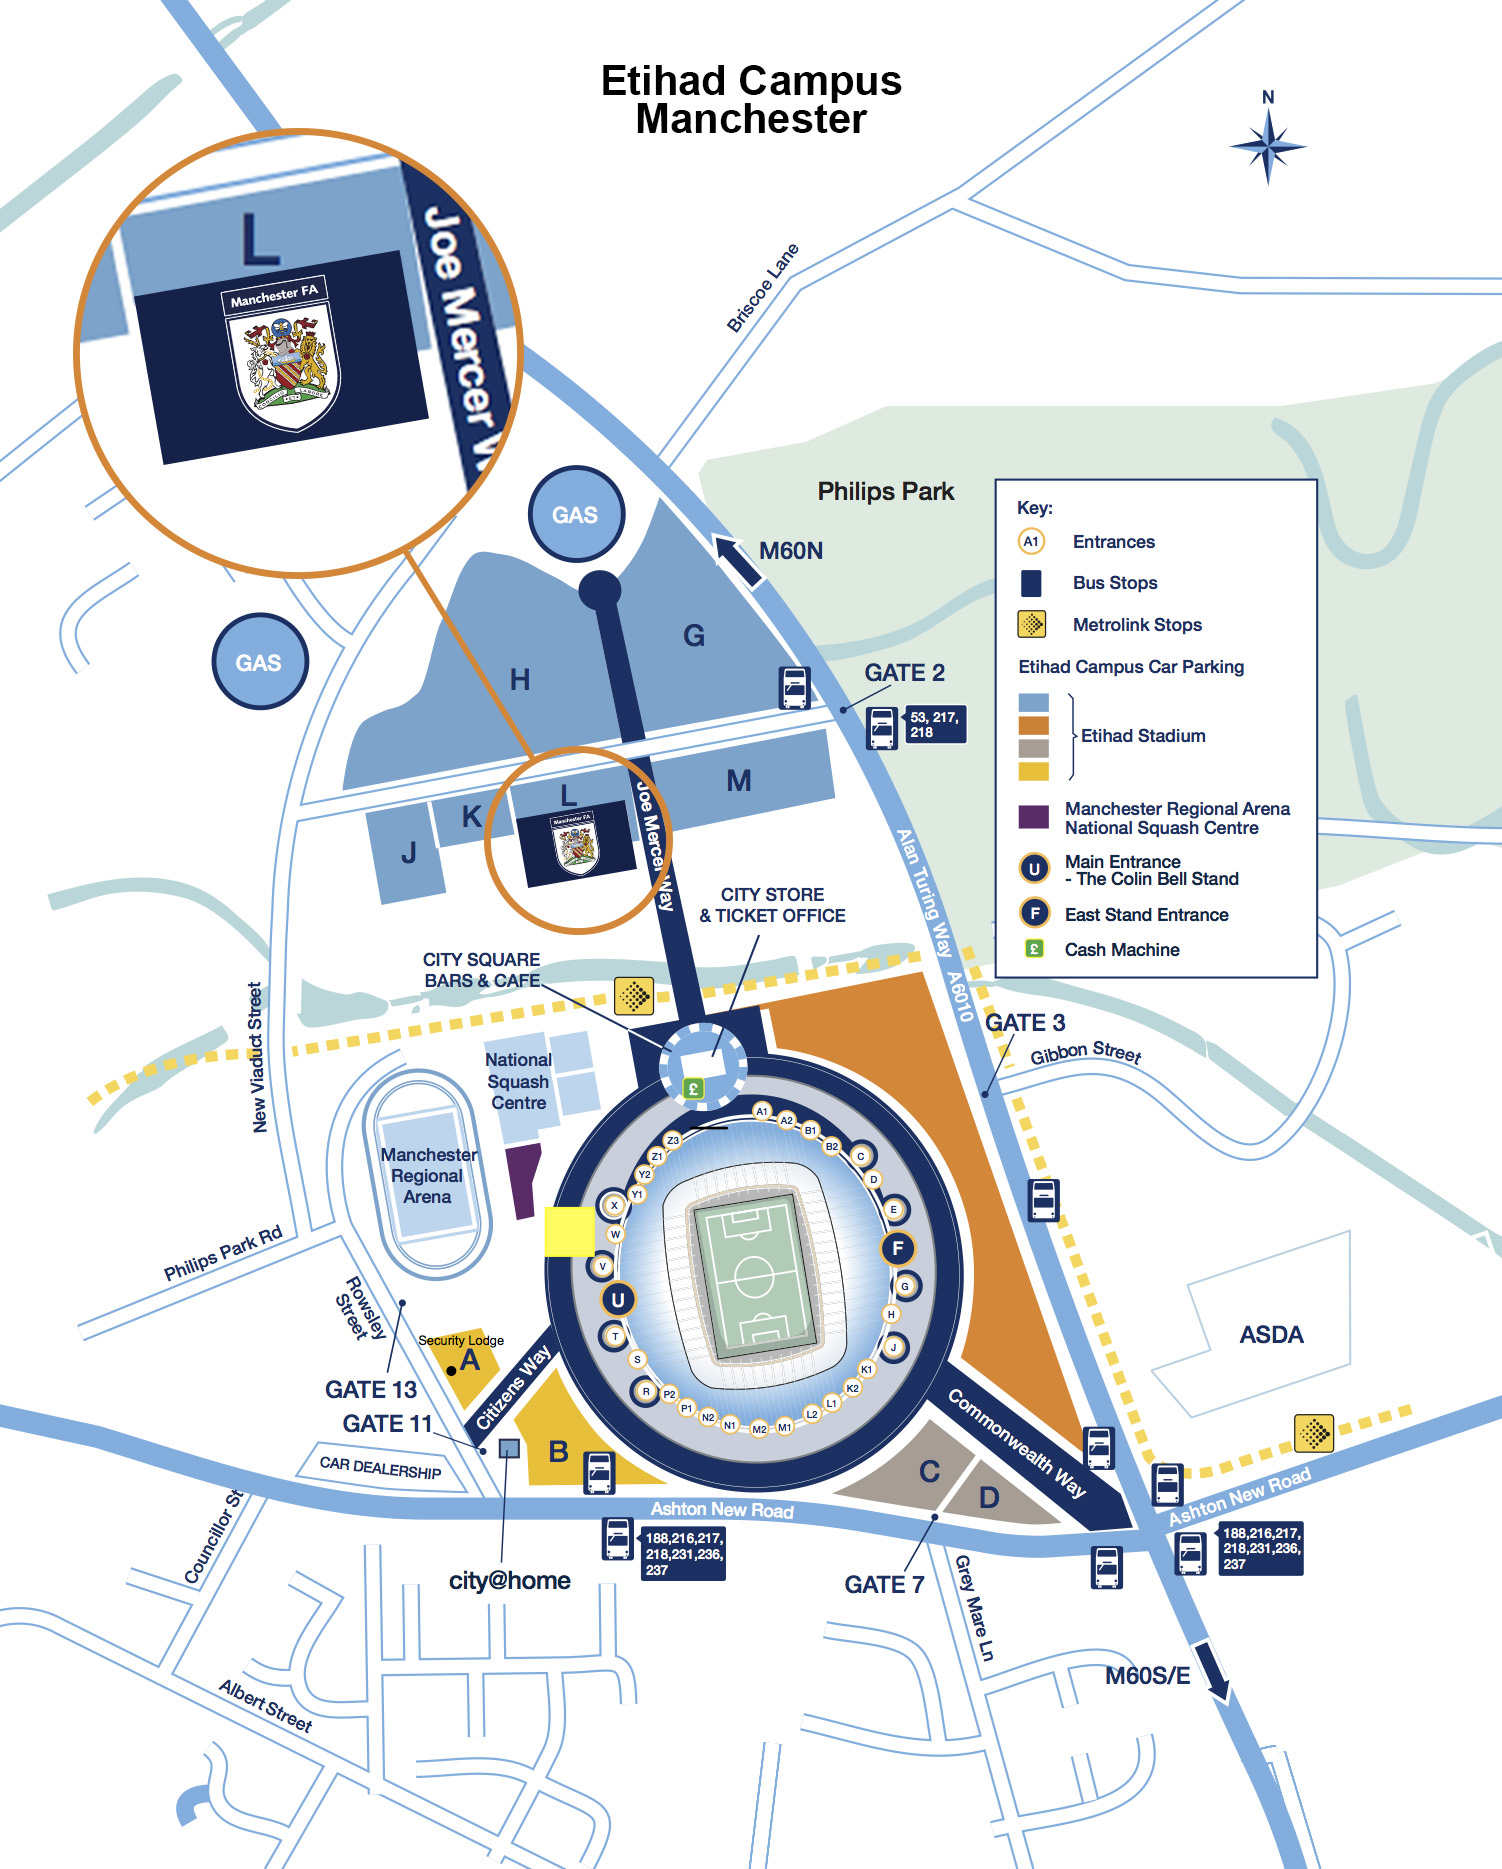 A detailed map of where the Manchester FA offices are located on the Etihad Campus.